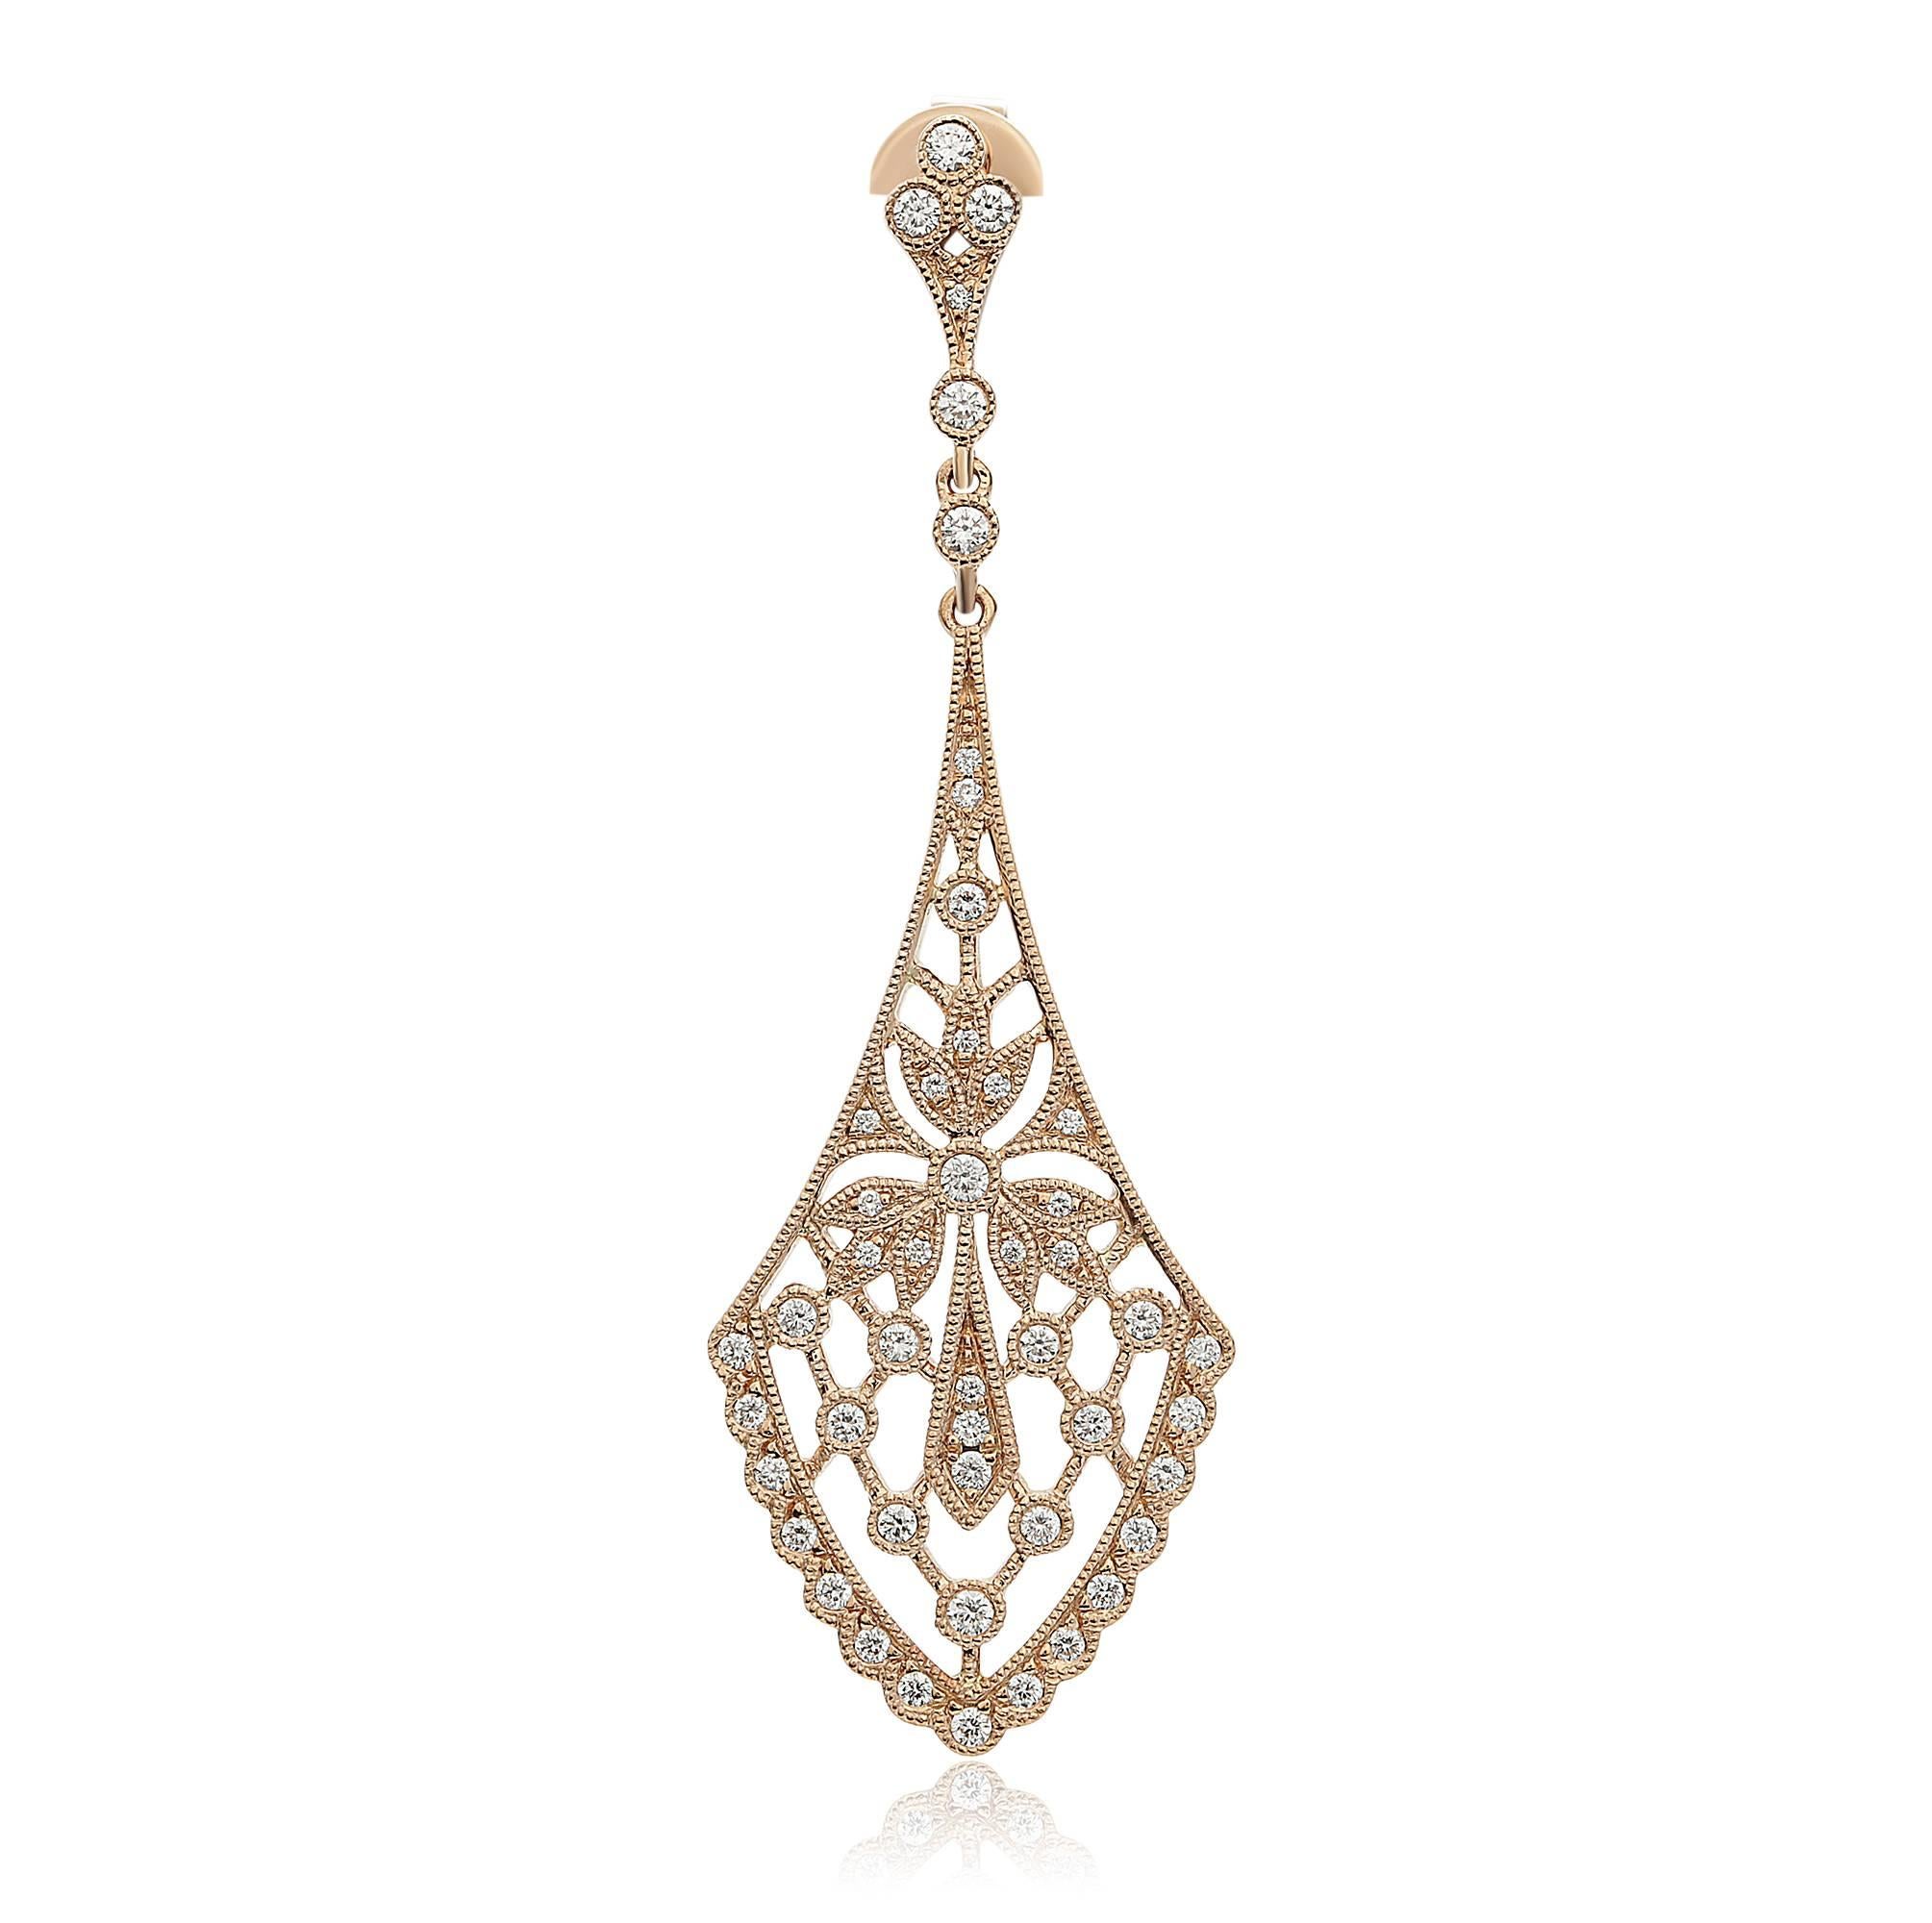 Beautiful ornate Art Noveau inspired drop earrings in 18k rose gold with round melee diamonds throughout the earrings. Perfect for the contemporary woman who loves antiqued motifs. Total diamond is 0.67. Offered by Marisa Perry Atelier, a luxury